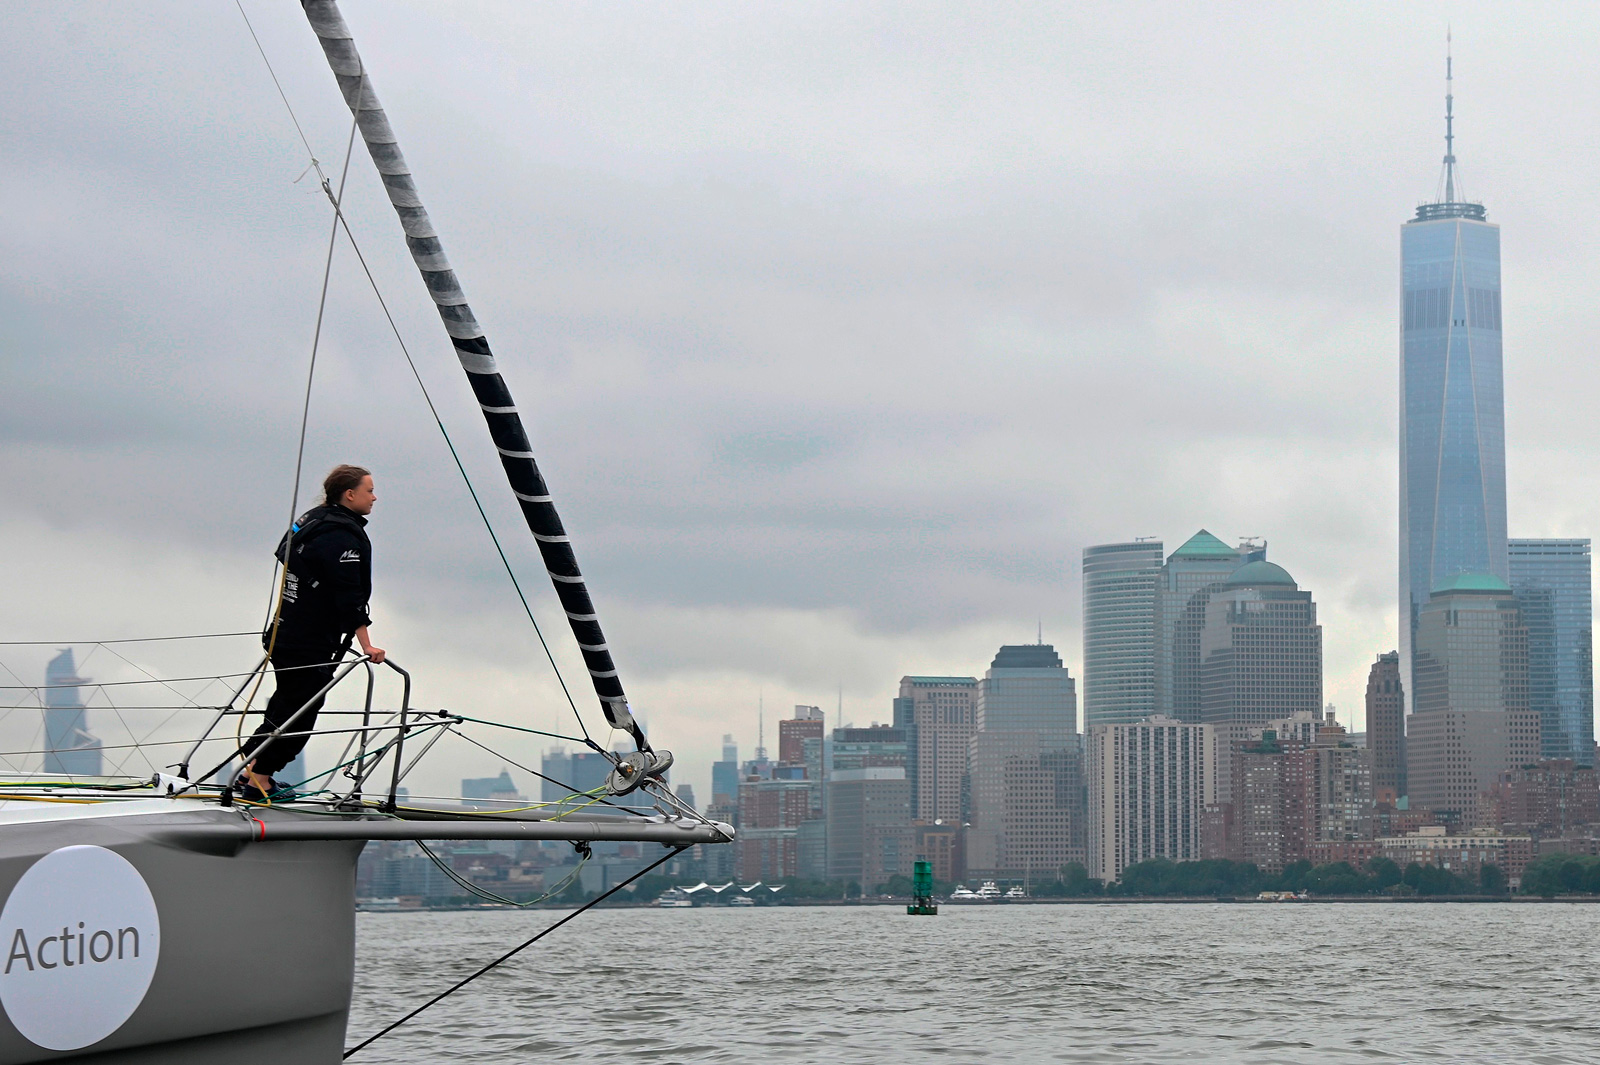 Swedish climate activist Greta Thunberg arriving to New York City after a fifteen-day journey crossing the Atlantic aboard the Malizia II, a zero-carbon yacht, August 28, 2019 